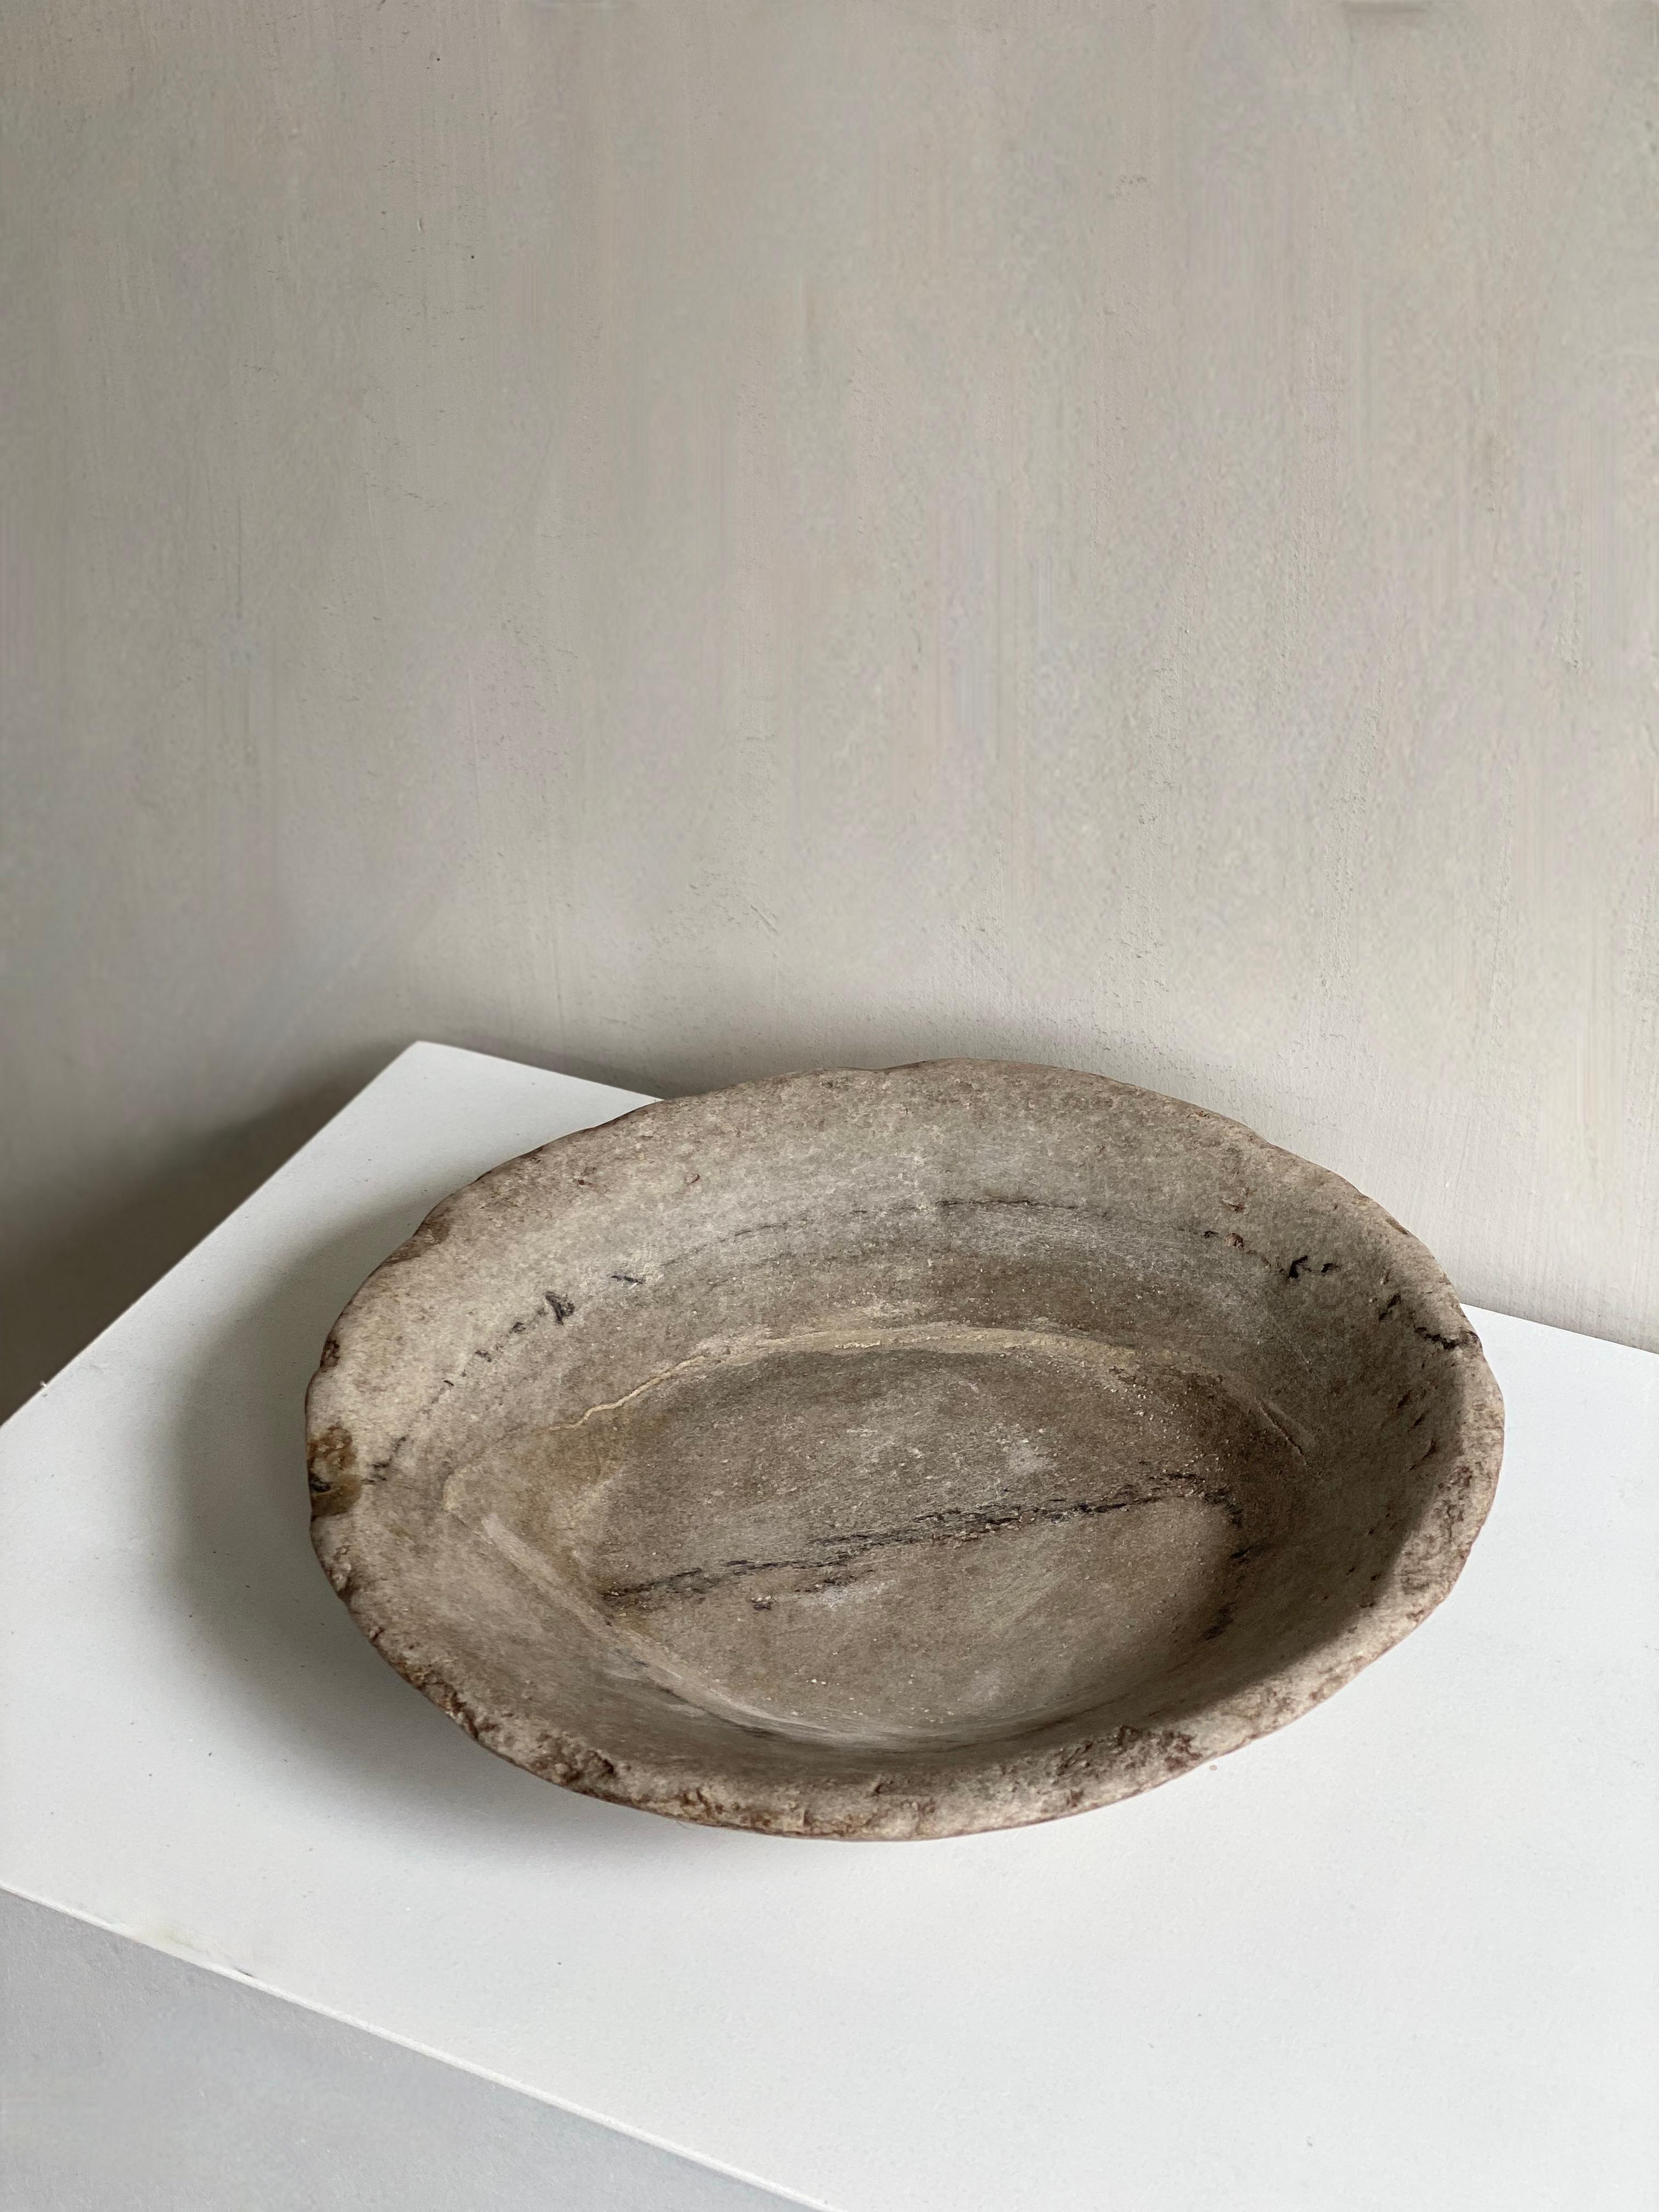 Minimalist and authentic Italian platter in marble.
Beautiful patina from years of use.
Soft earth and gray tones.


We ship securely packaged worldwide with insurance.
 